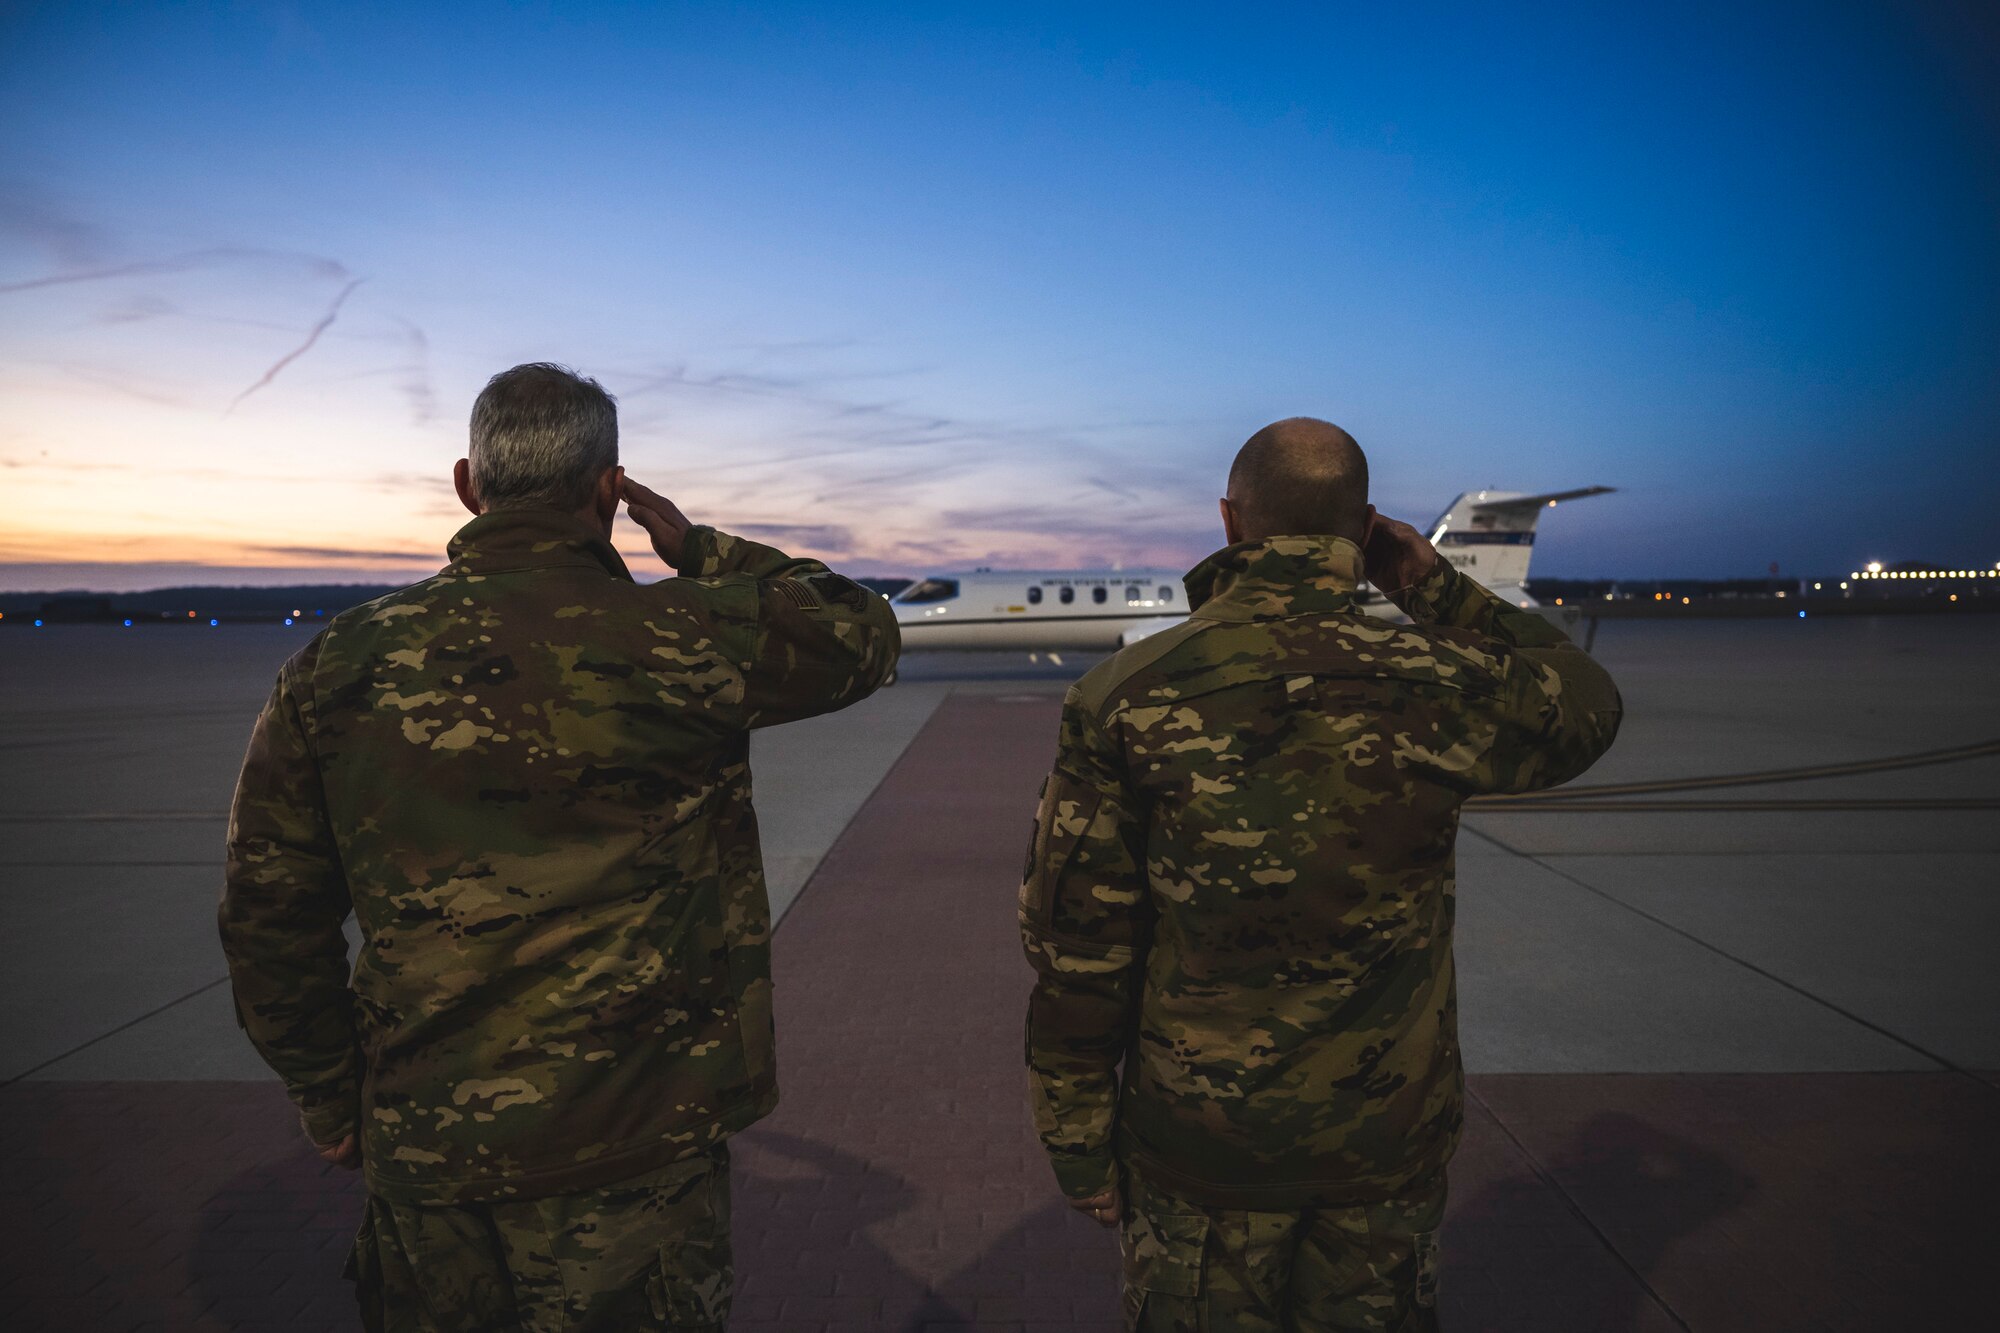 Col. Christopher Meeker (left), 88th Air Base Wing commander, and Lt. Gen. Carl Schaefer, Air Force Materiel Command deputy commander, salute Jan. 9 as the jet carrying Gina Ortiz Jones, undersecretary of the Air Force, prepares for takeoff from Wright-Patterson Air Force Base, Ohio.